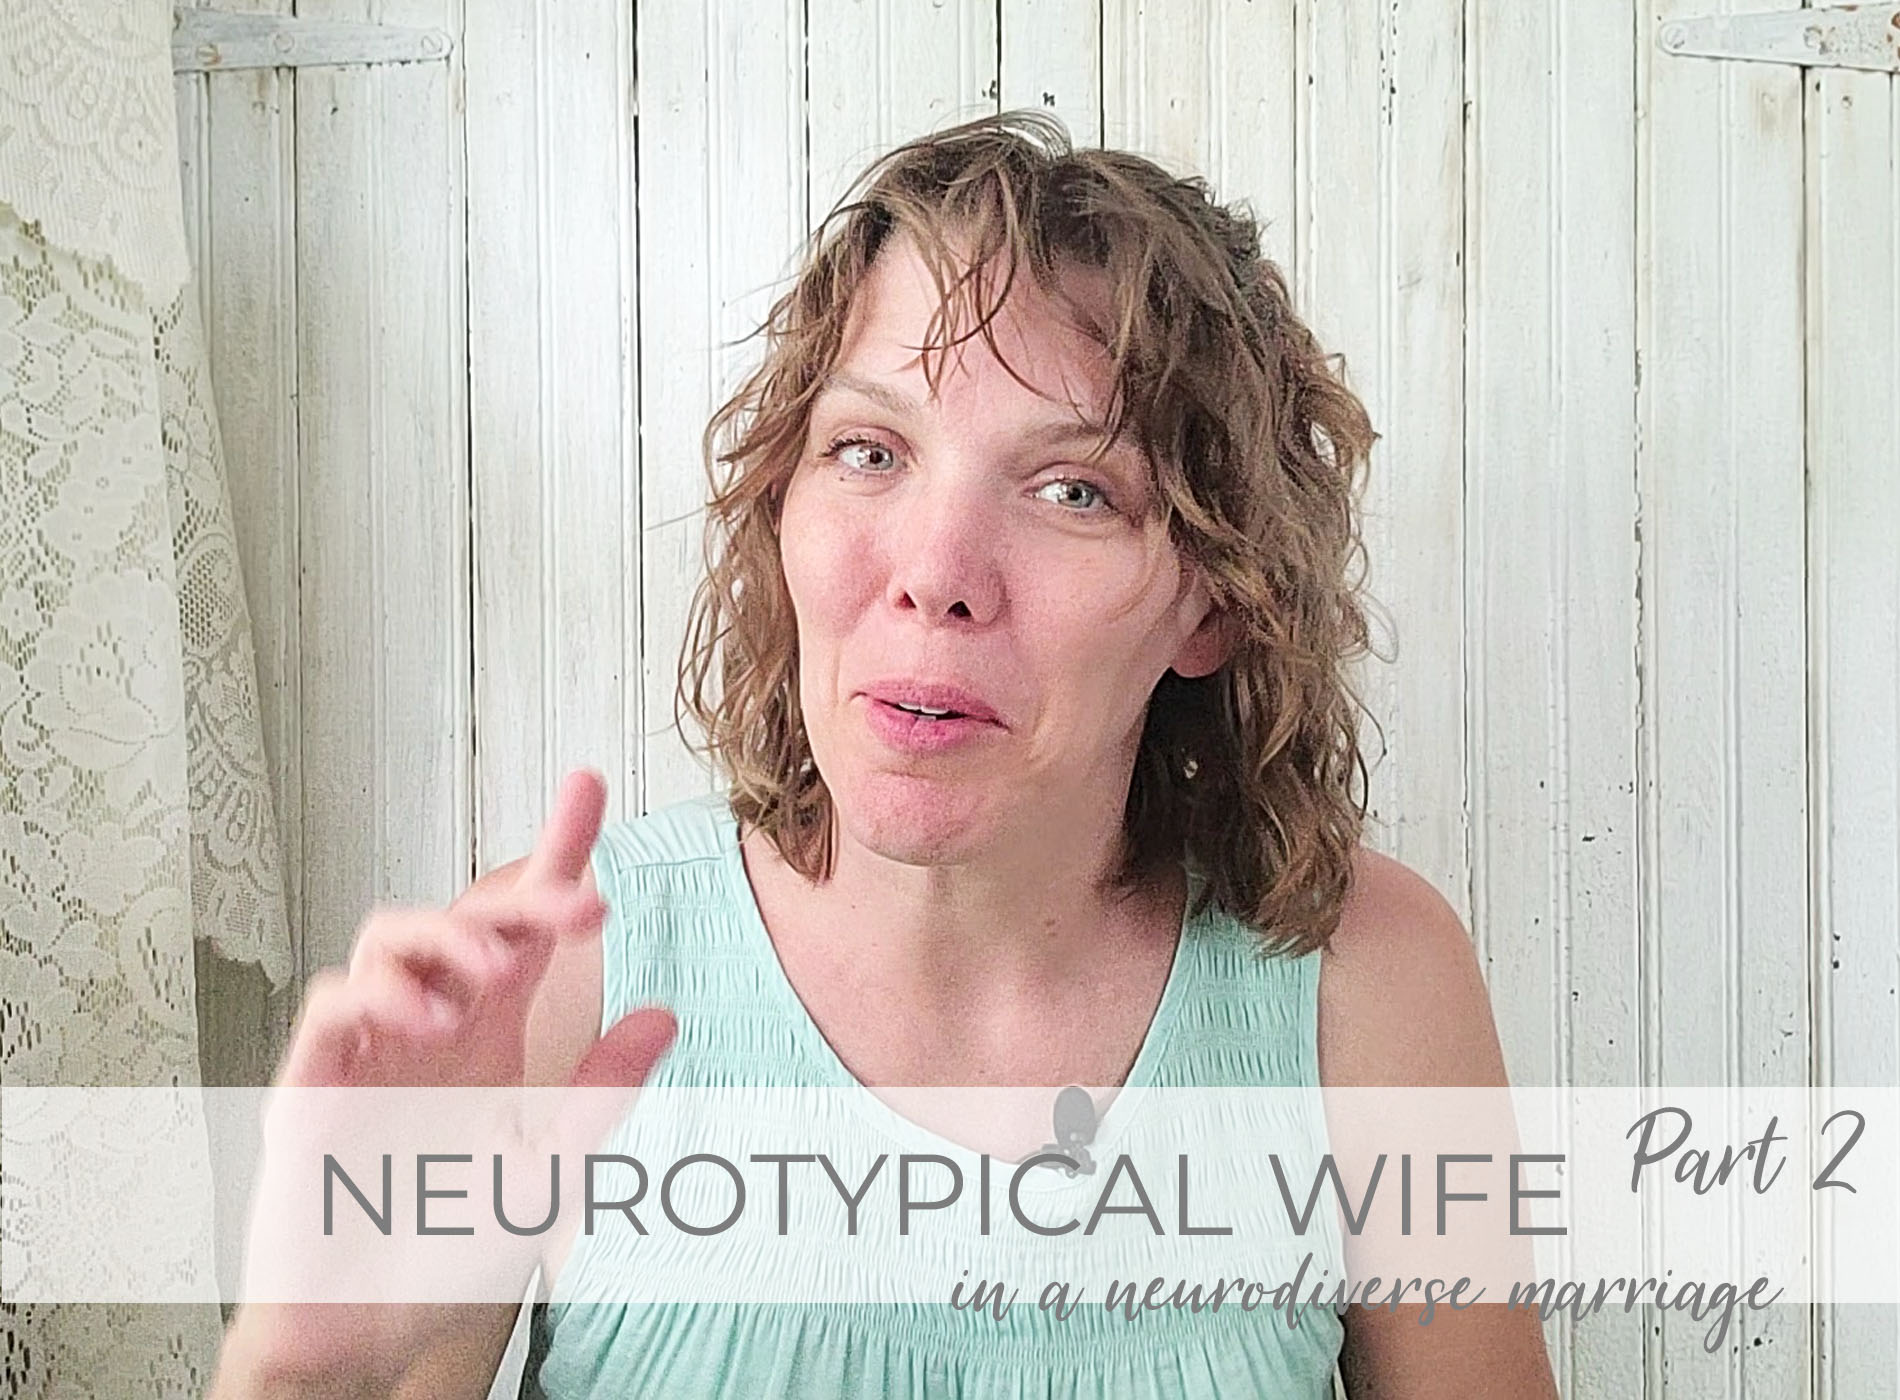 Showcase of A Neurotypical Wife in Neurodiverse Marriage | prodigalpieces.com #prodigalpieces